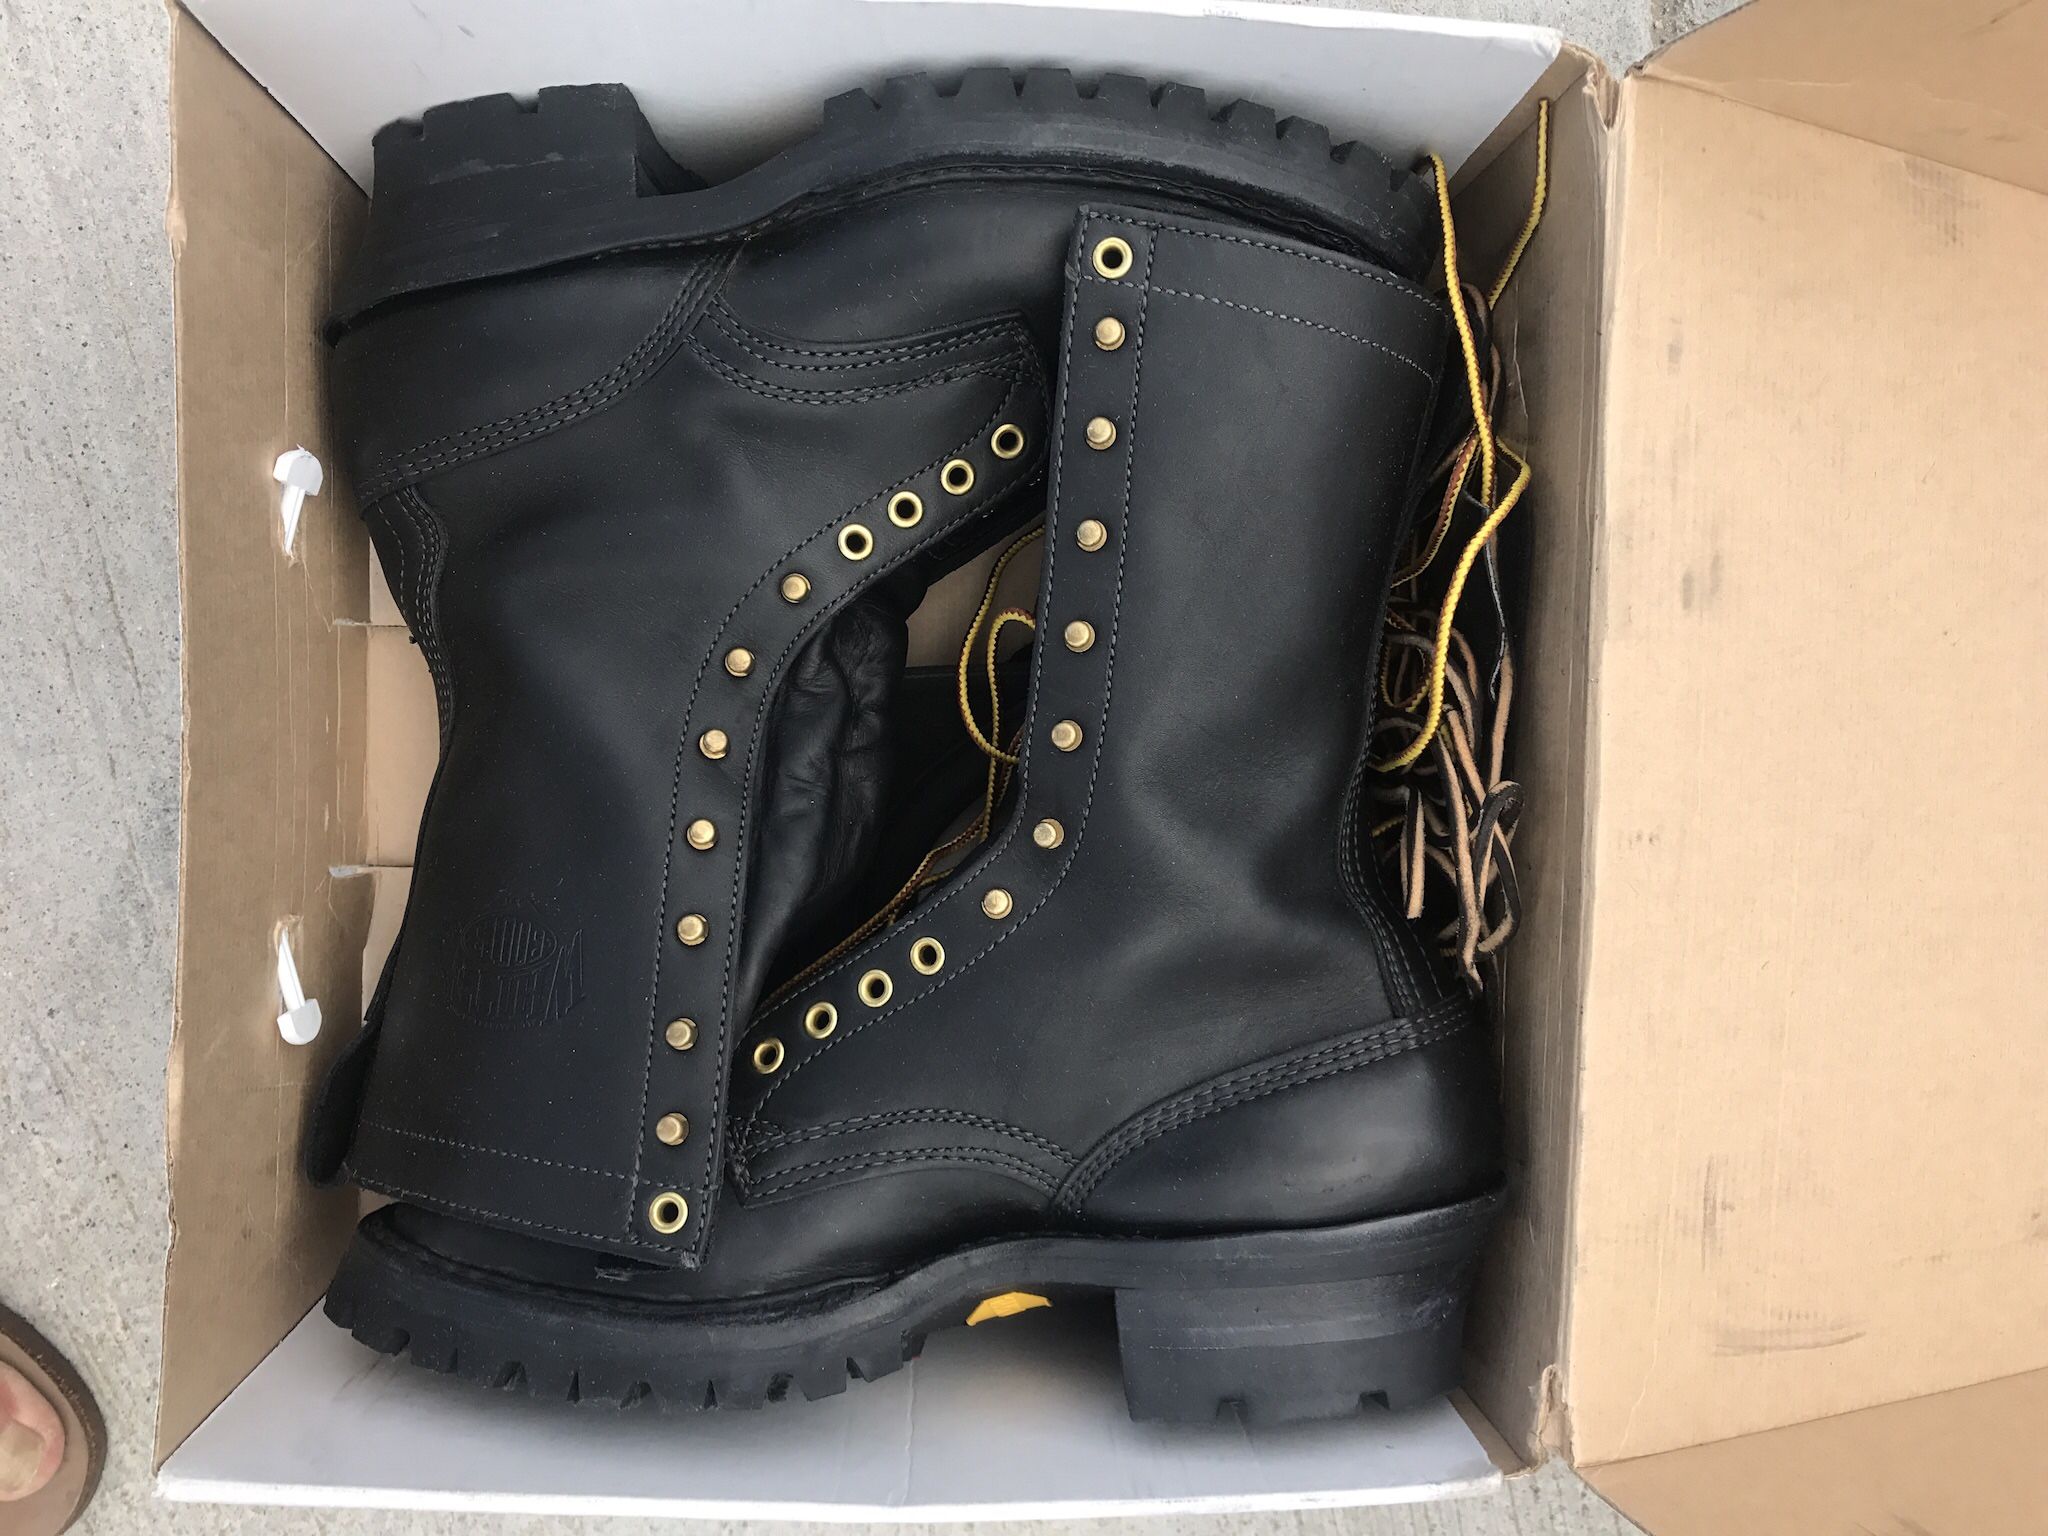 Whites Smokejumper Boots Size 10d 